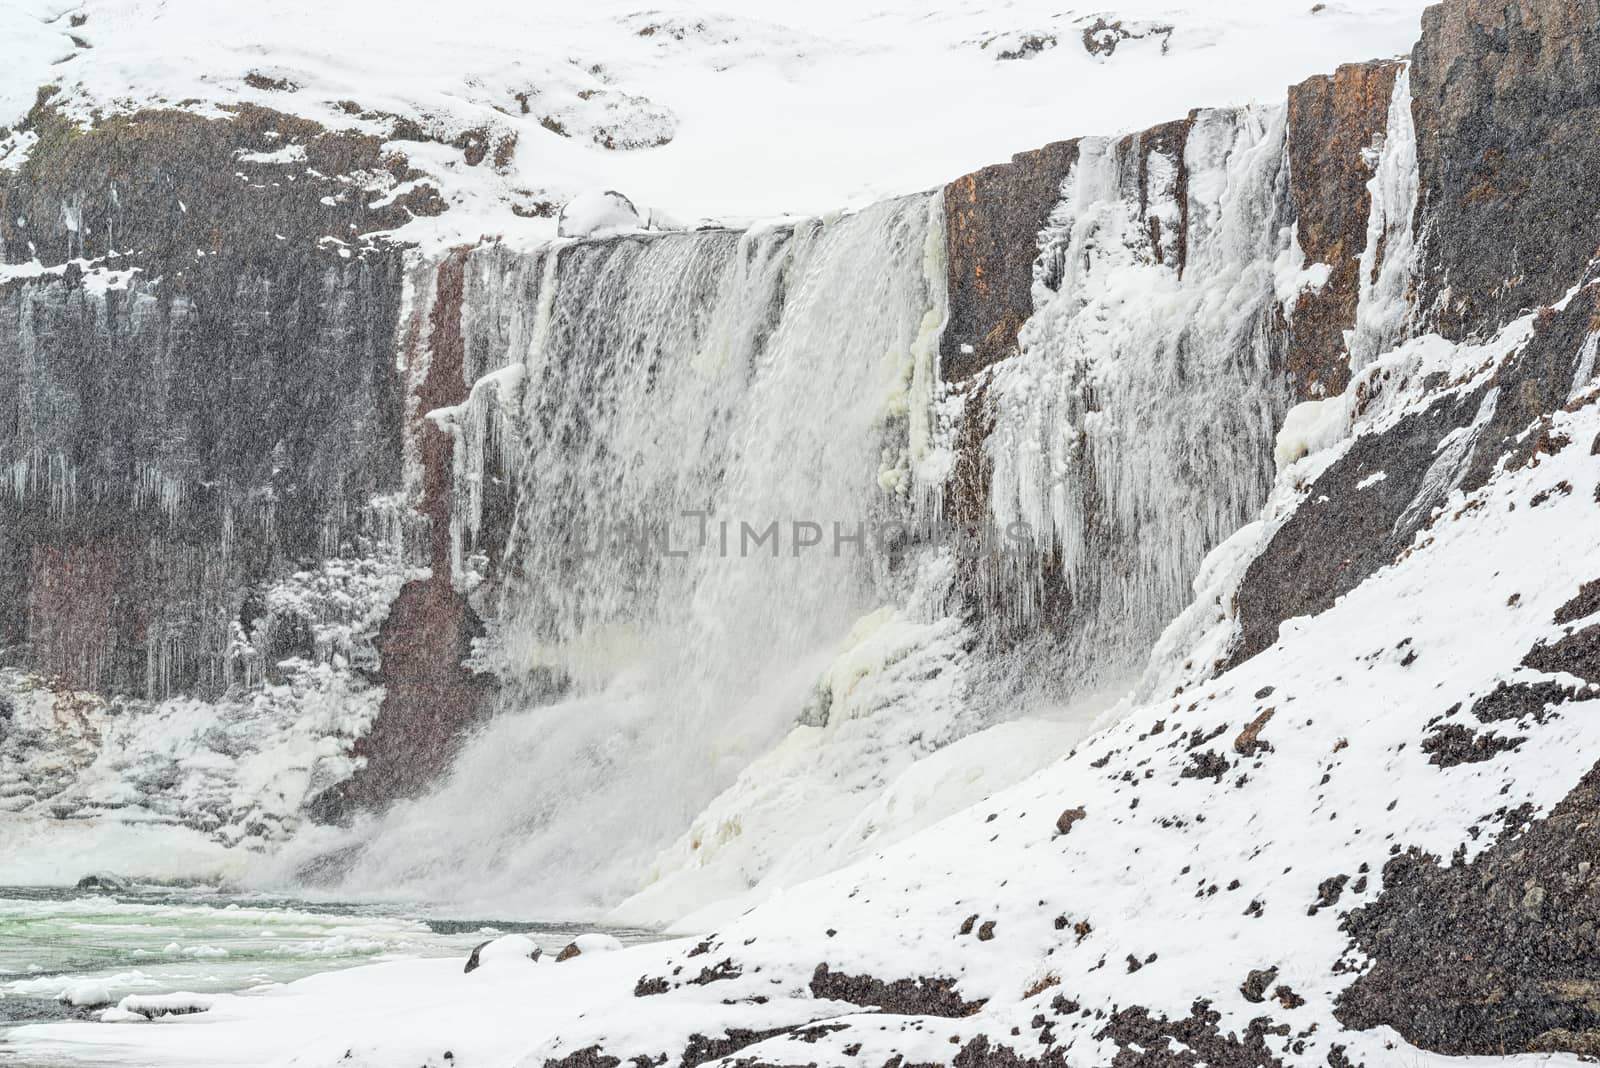 Snaedufoss waterfall during a snowing winter day, Iceland